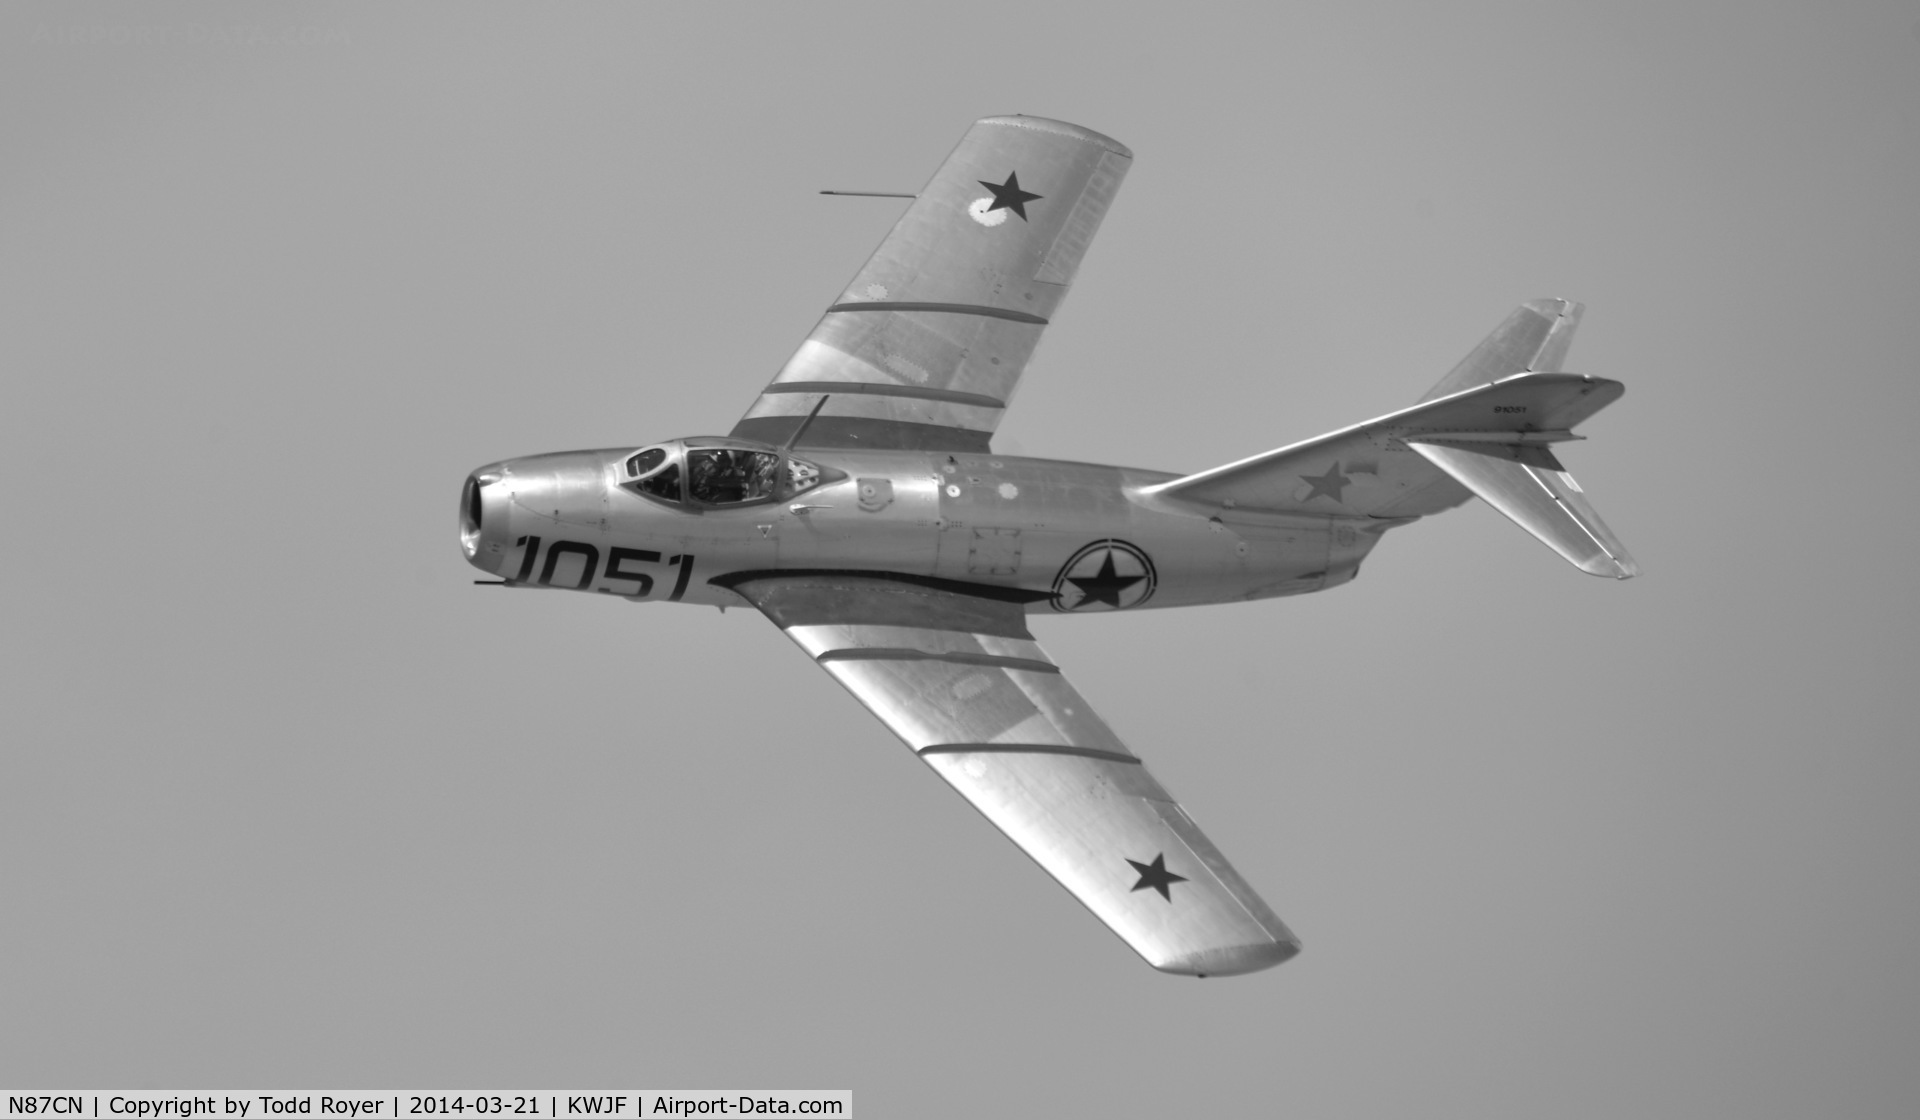 N87CN, Mikoyan-Gurevich MiG-15 C/N 910-51, Flying at the Los Angeles County Airshow 2014